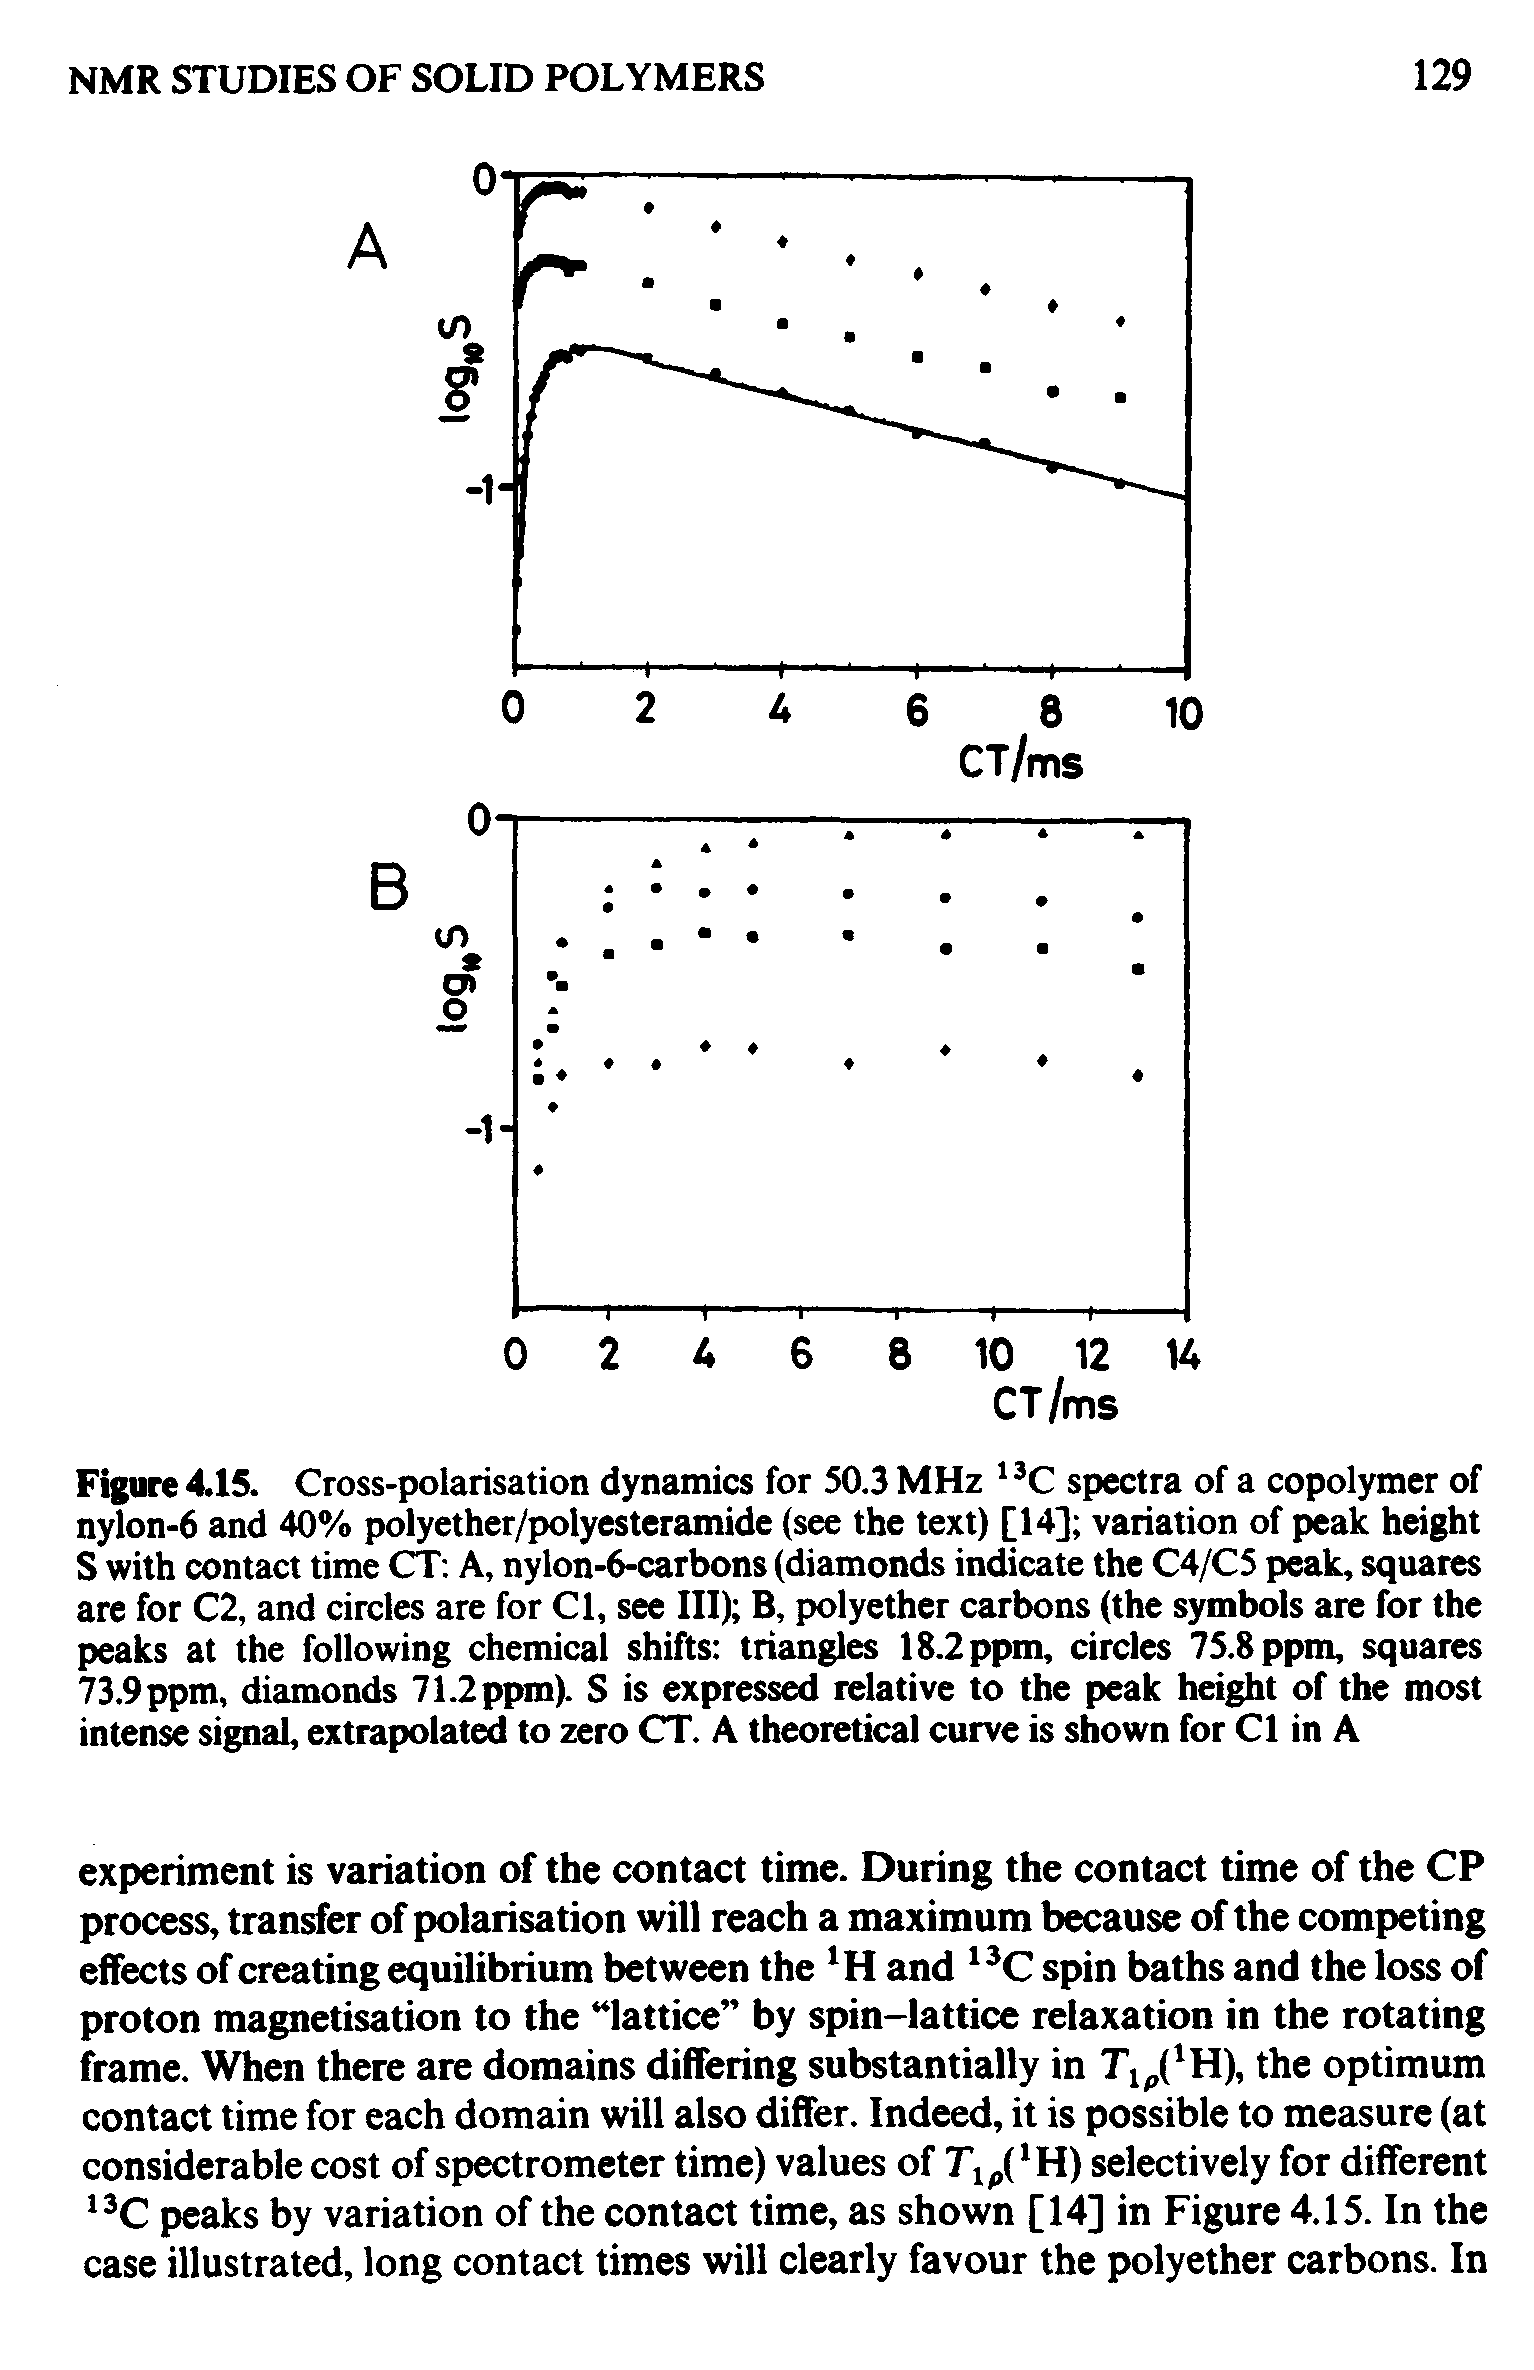 Figure 4.15. Cross-polarisation dynamics for S0.3MHz spectra of a copolymer of nylon-6 and 40% polyether/polyesteramide (see the text) [14] variation of peak height S with contact time CT A, nylon-6-carbons (diamonds indicate the C4/CS peak, squares are for C2, and circles are for Cl, see III) B, polyether carbons (the symbols are for the peaks at the following chemical shifts triangles 18.2 ppm, circles 75.8 ppm, squares 73.9 ppm, diamonds 71.2 ppm). S is expressed relative to the peak height of the most intense signal, extrapolated to zero CT. A theoretical curve is shown for Cl in A...